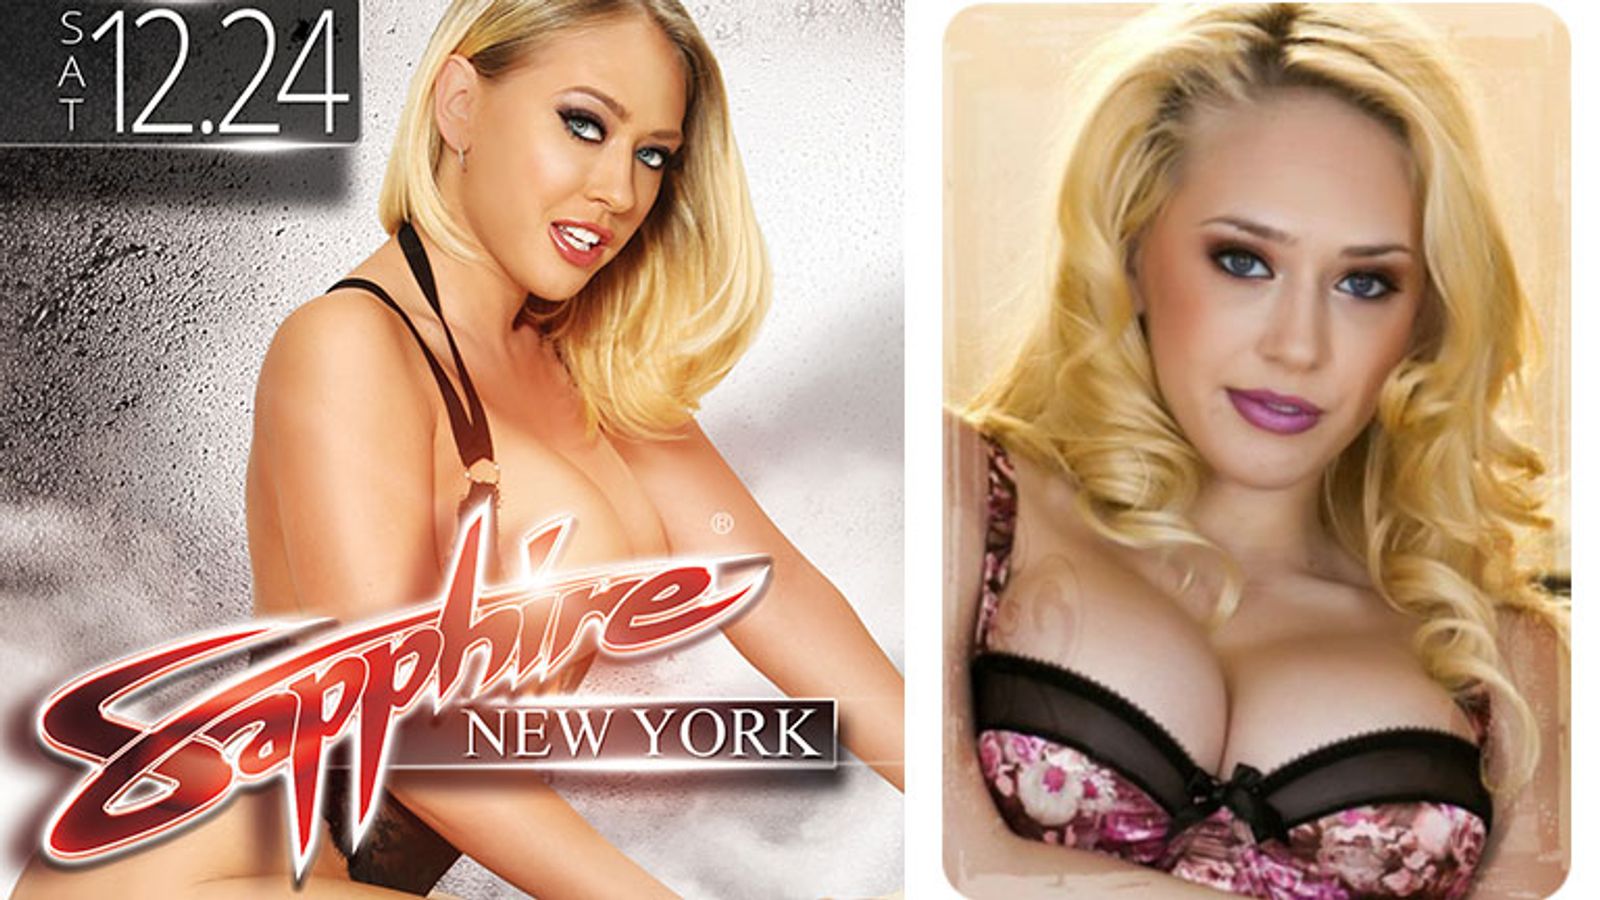 Kagney Linn Karter to Spend Christmas Eve Featuring at Sapphire NYC